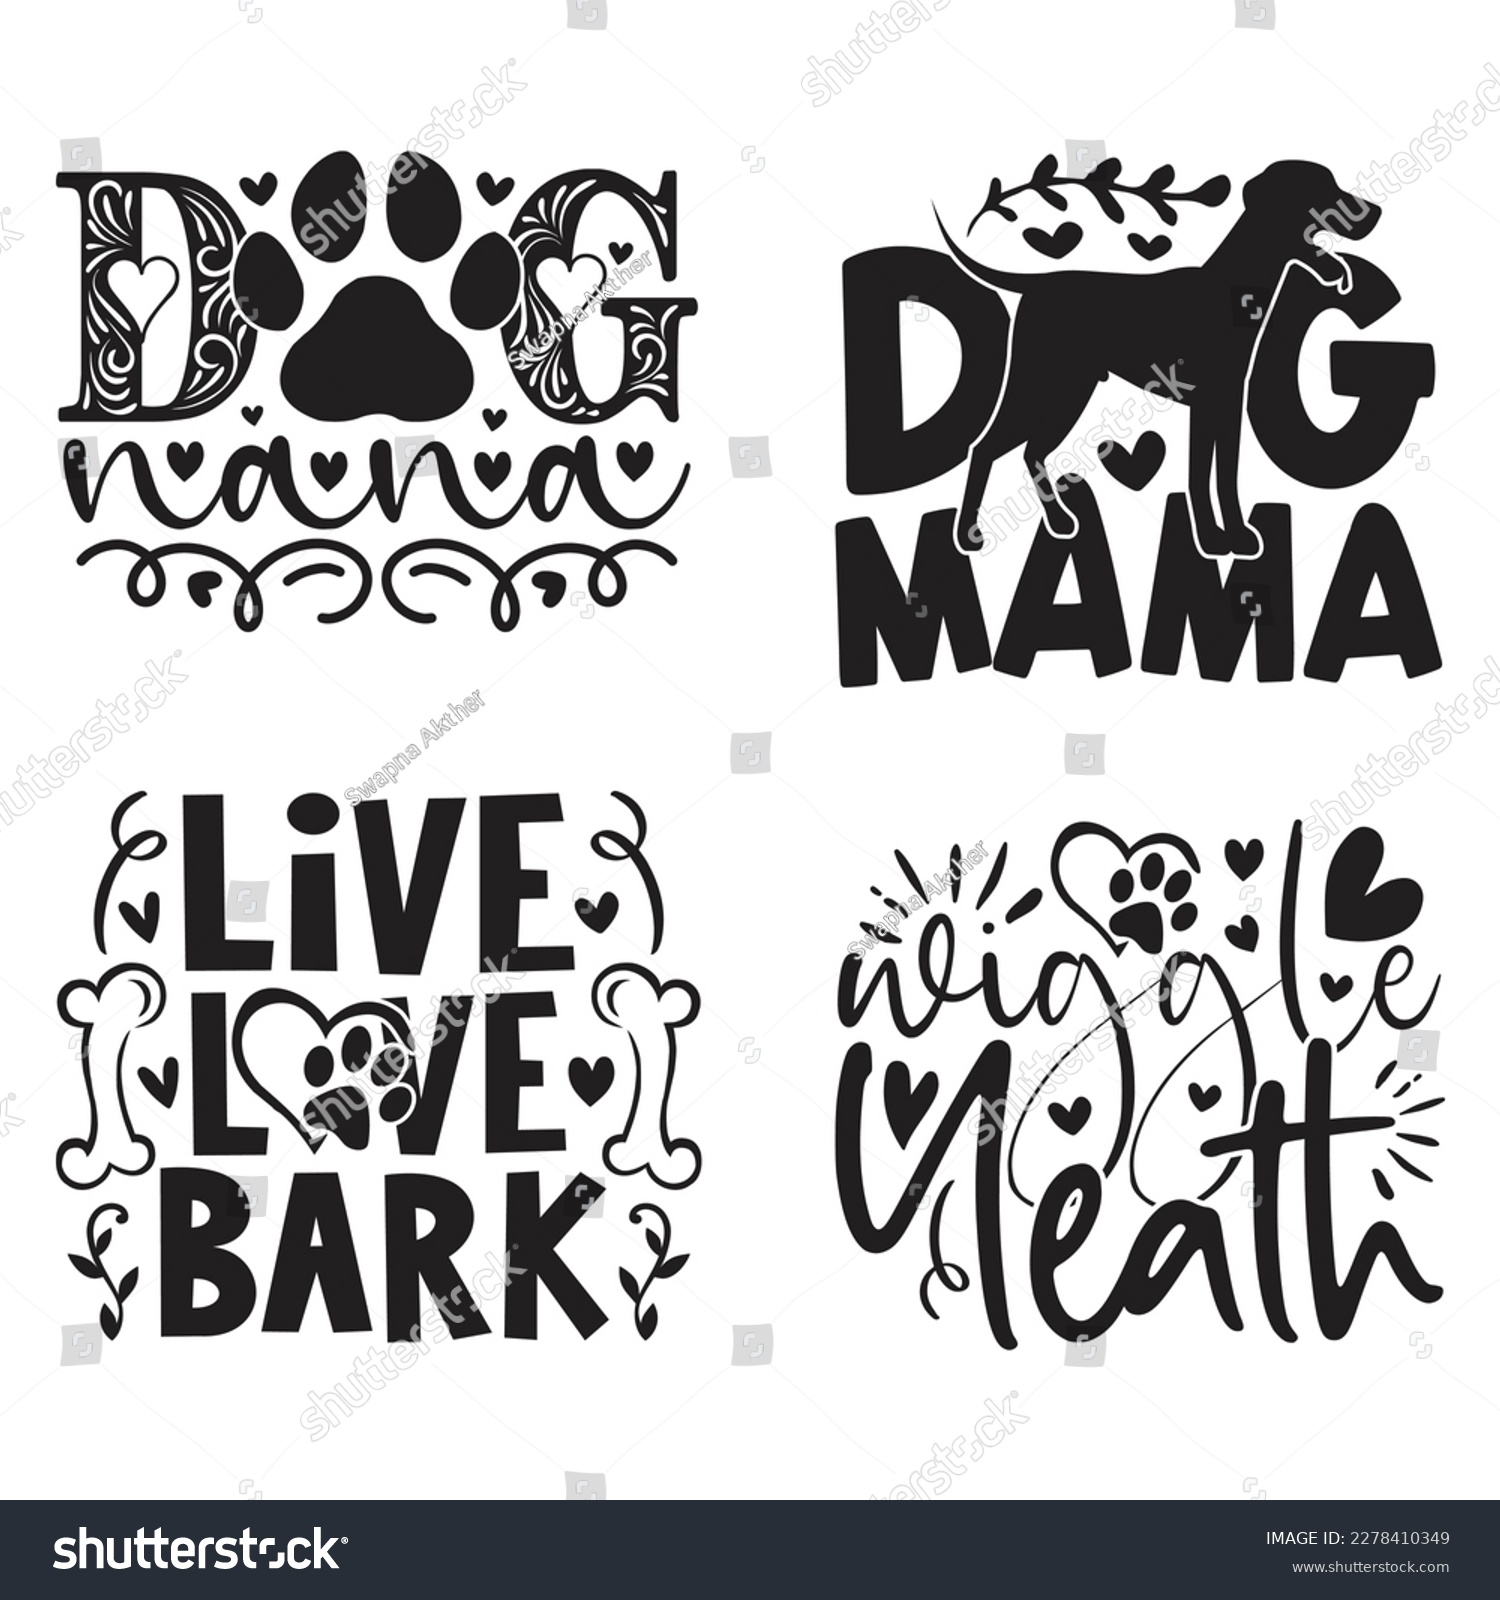 SVG of Boho Retro Style Dog Quotes T-shirt And SVG Design Bundle. Dog SVG Quotes T shirt Design Bundle, Vector EPS Editable Files, Can You Download This File. svg